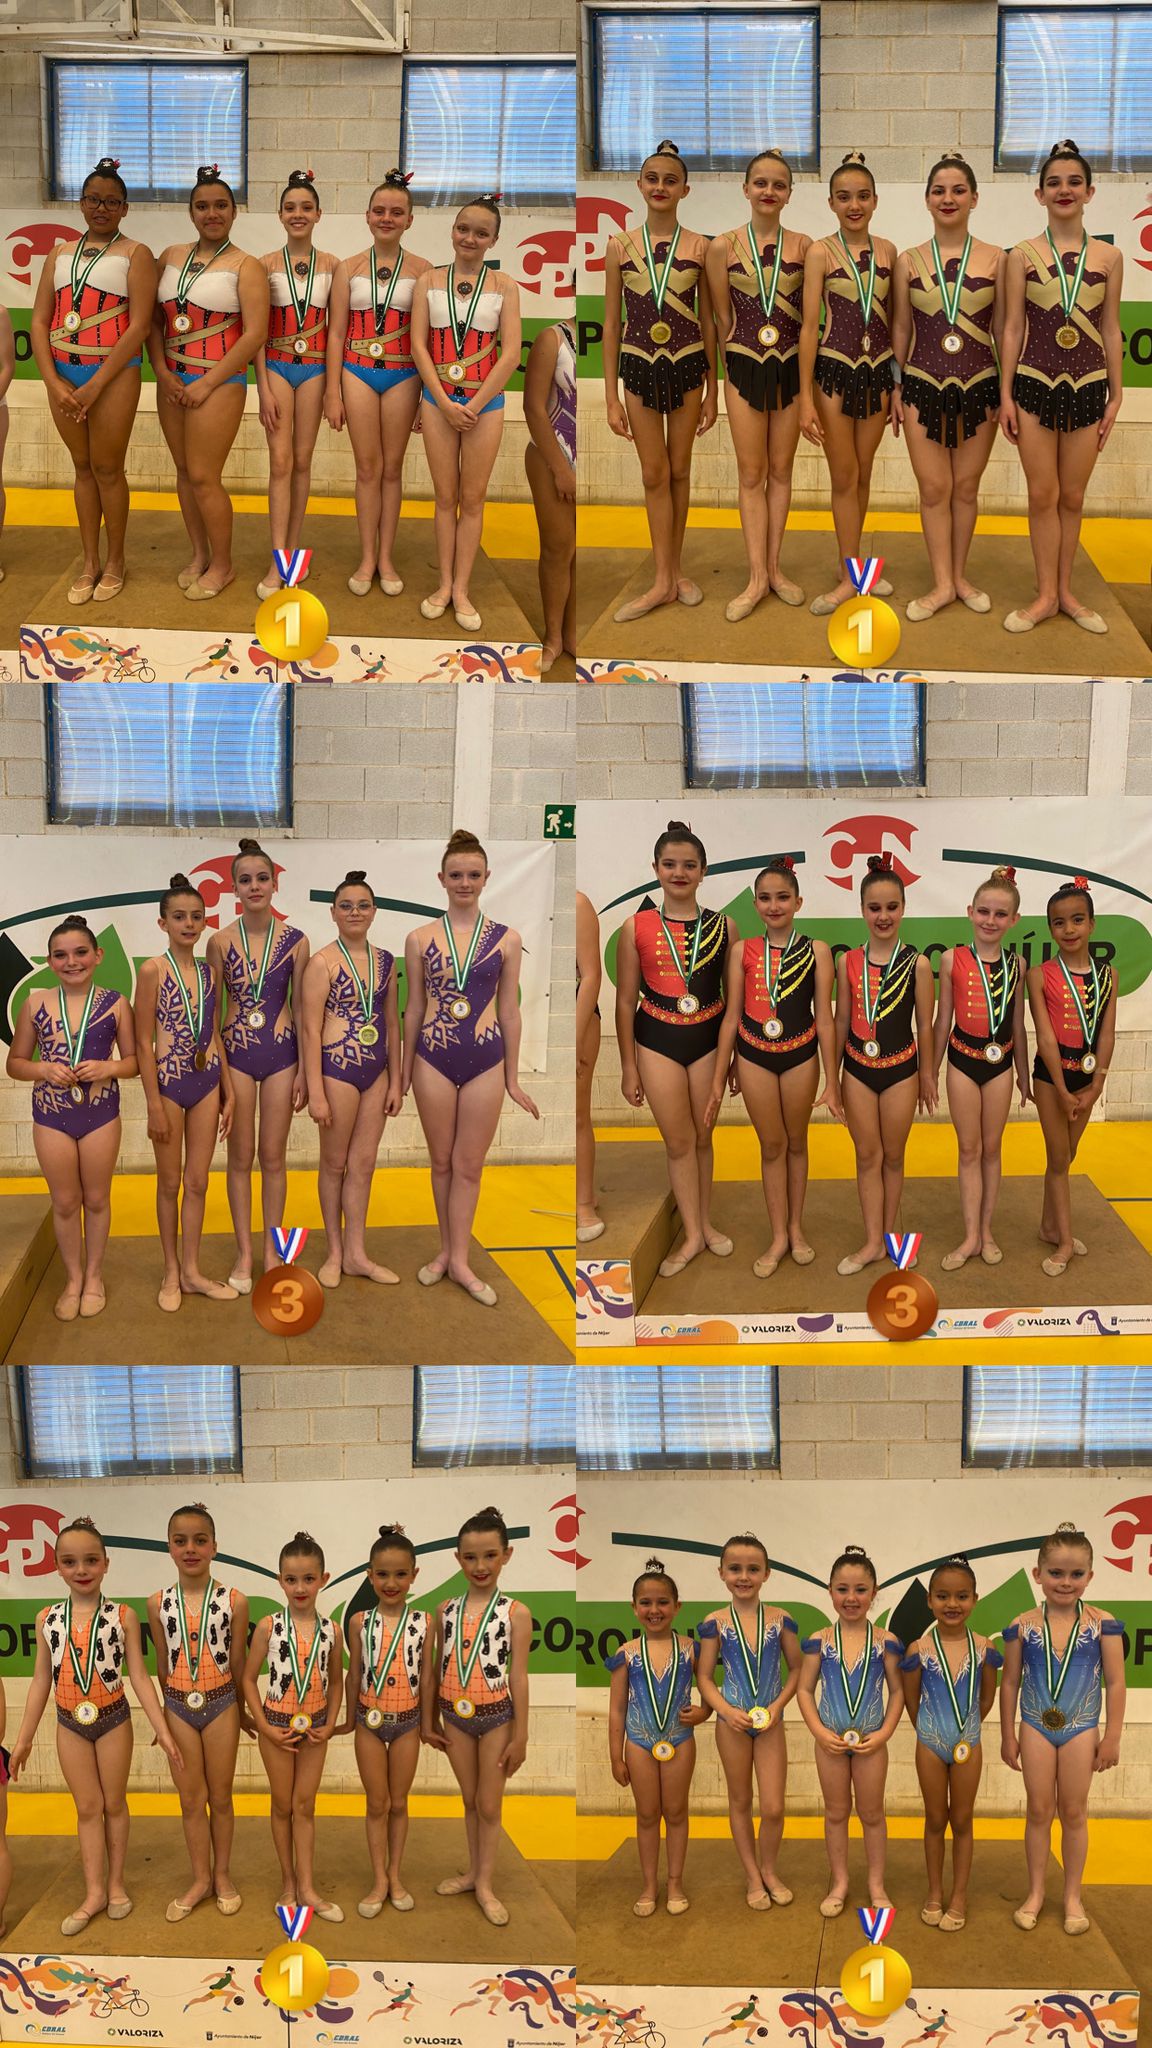 The Mojácar Costarítmica team from the Municipal Sports School continues its meteoric rise to being among the best gymnasts in the province, once again winning numerous medals, this time in the last competition held in Níjar.